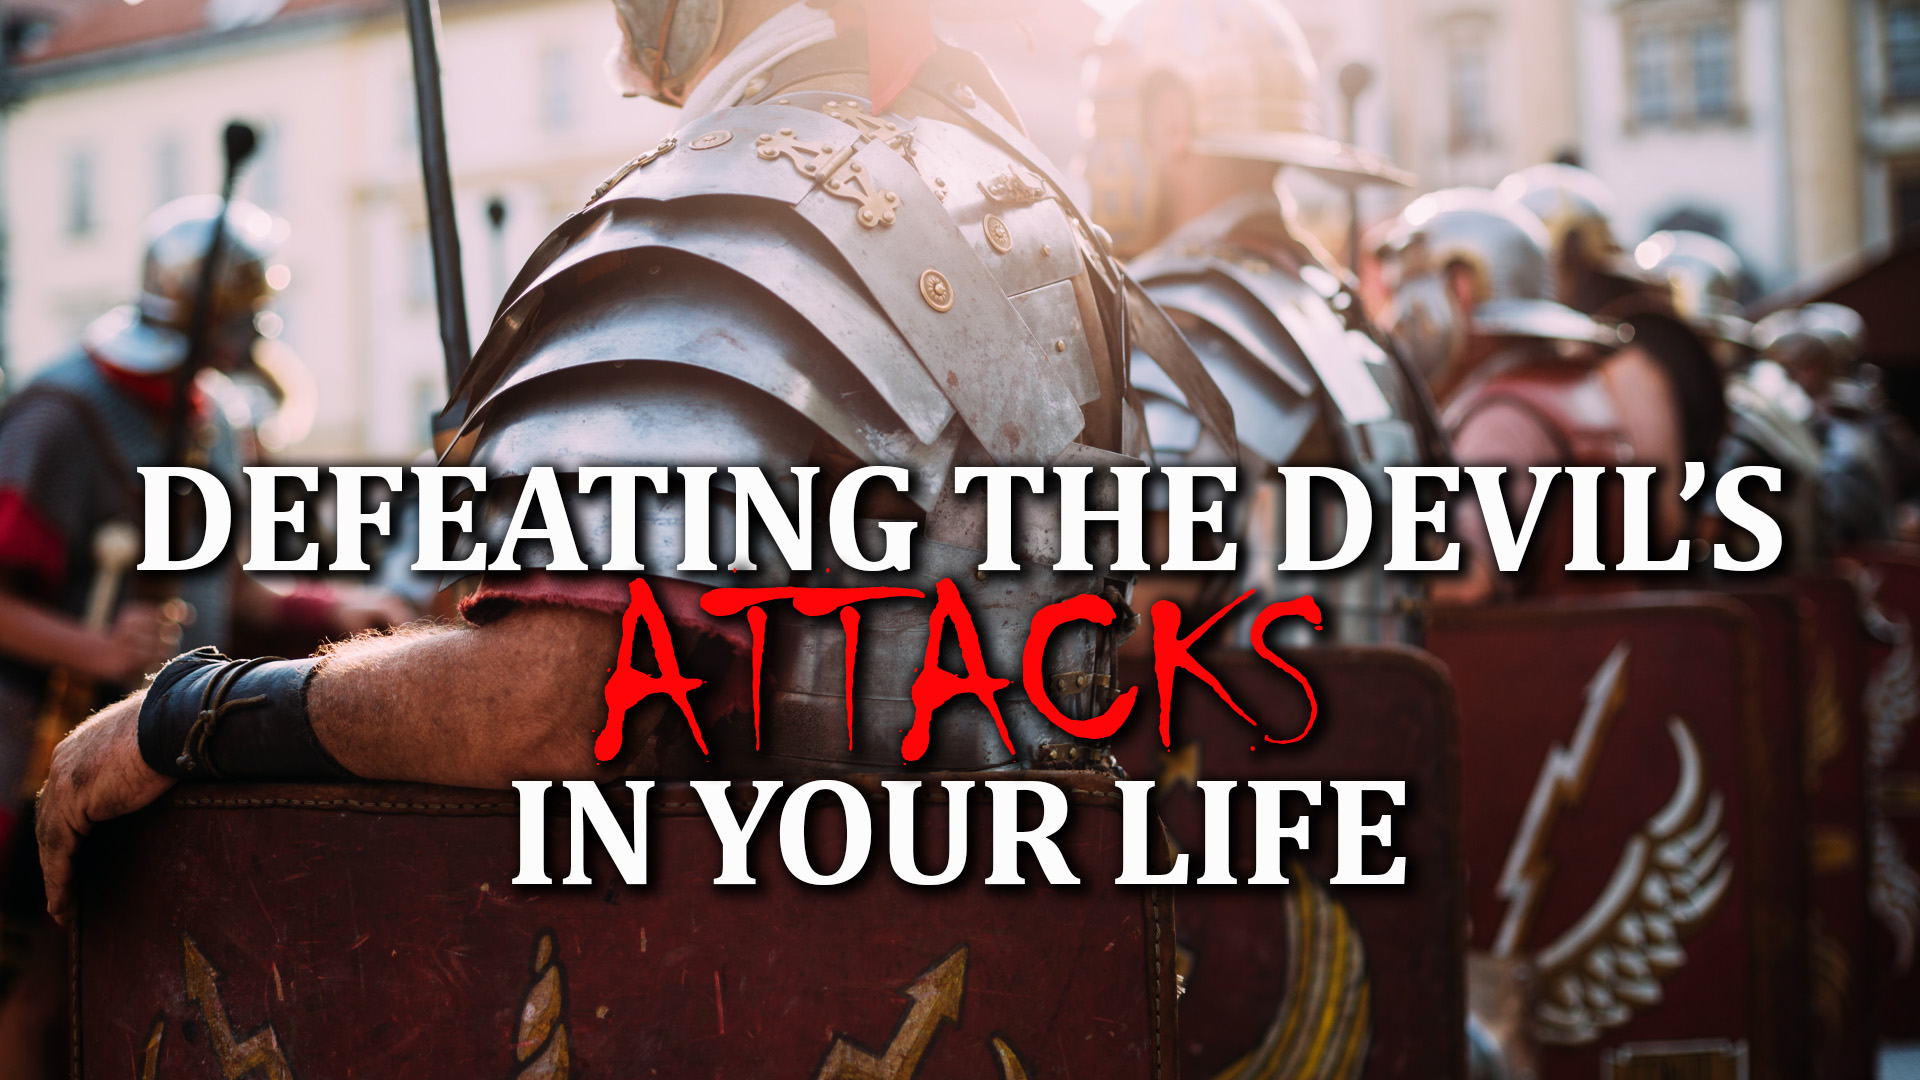 11-16-21 How to Defeat the Devils attacks in your life